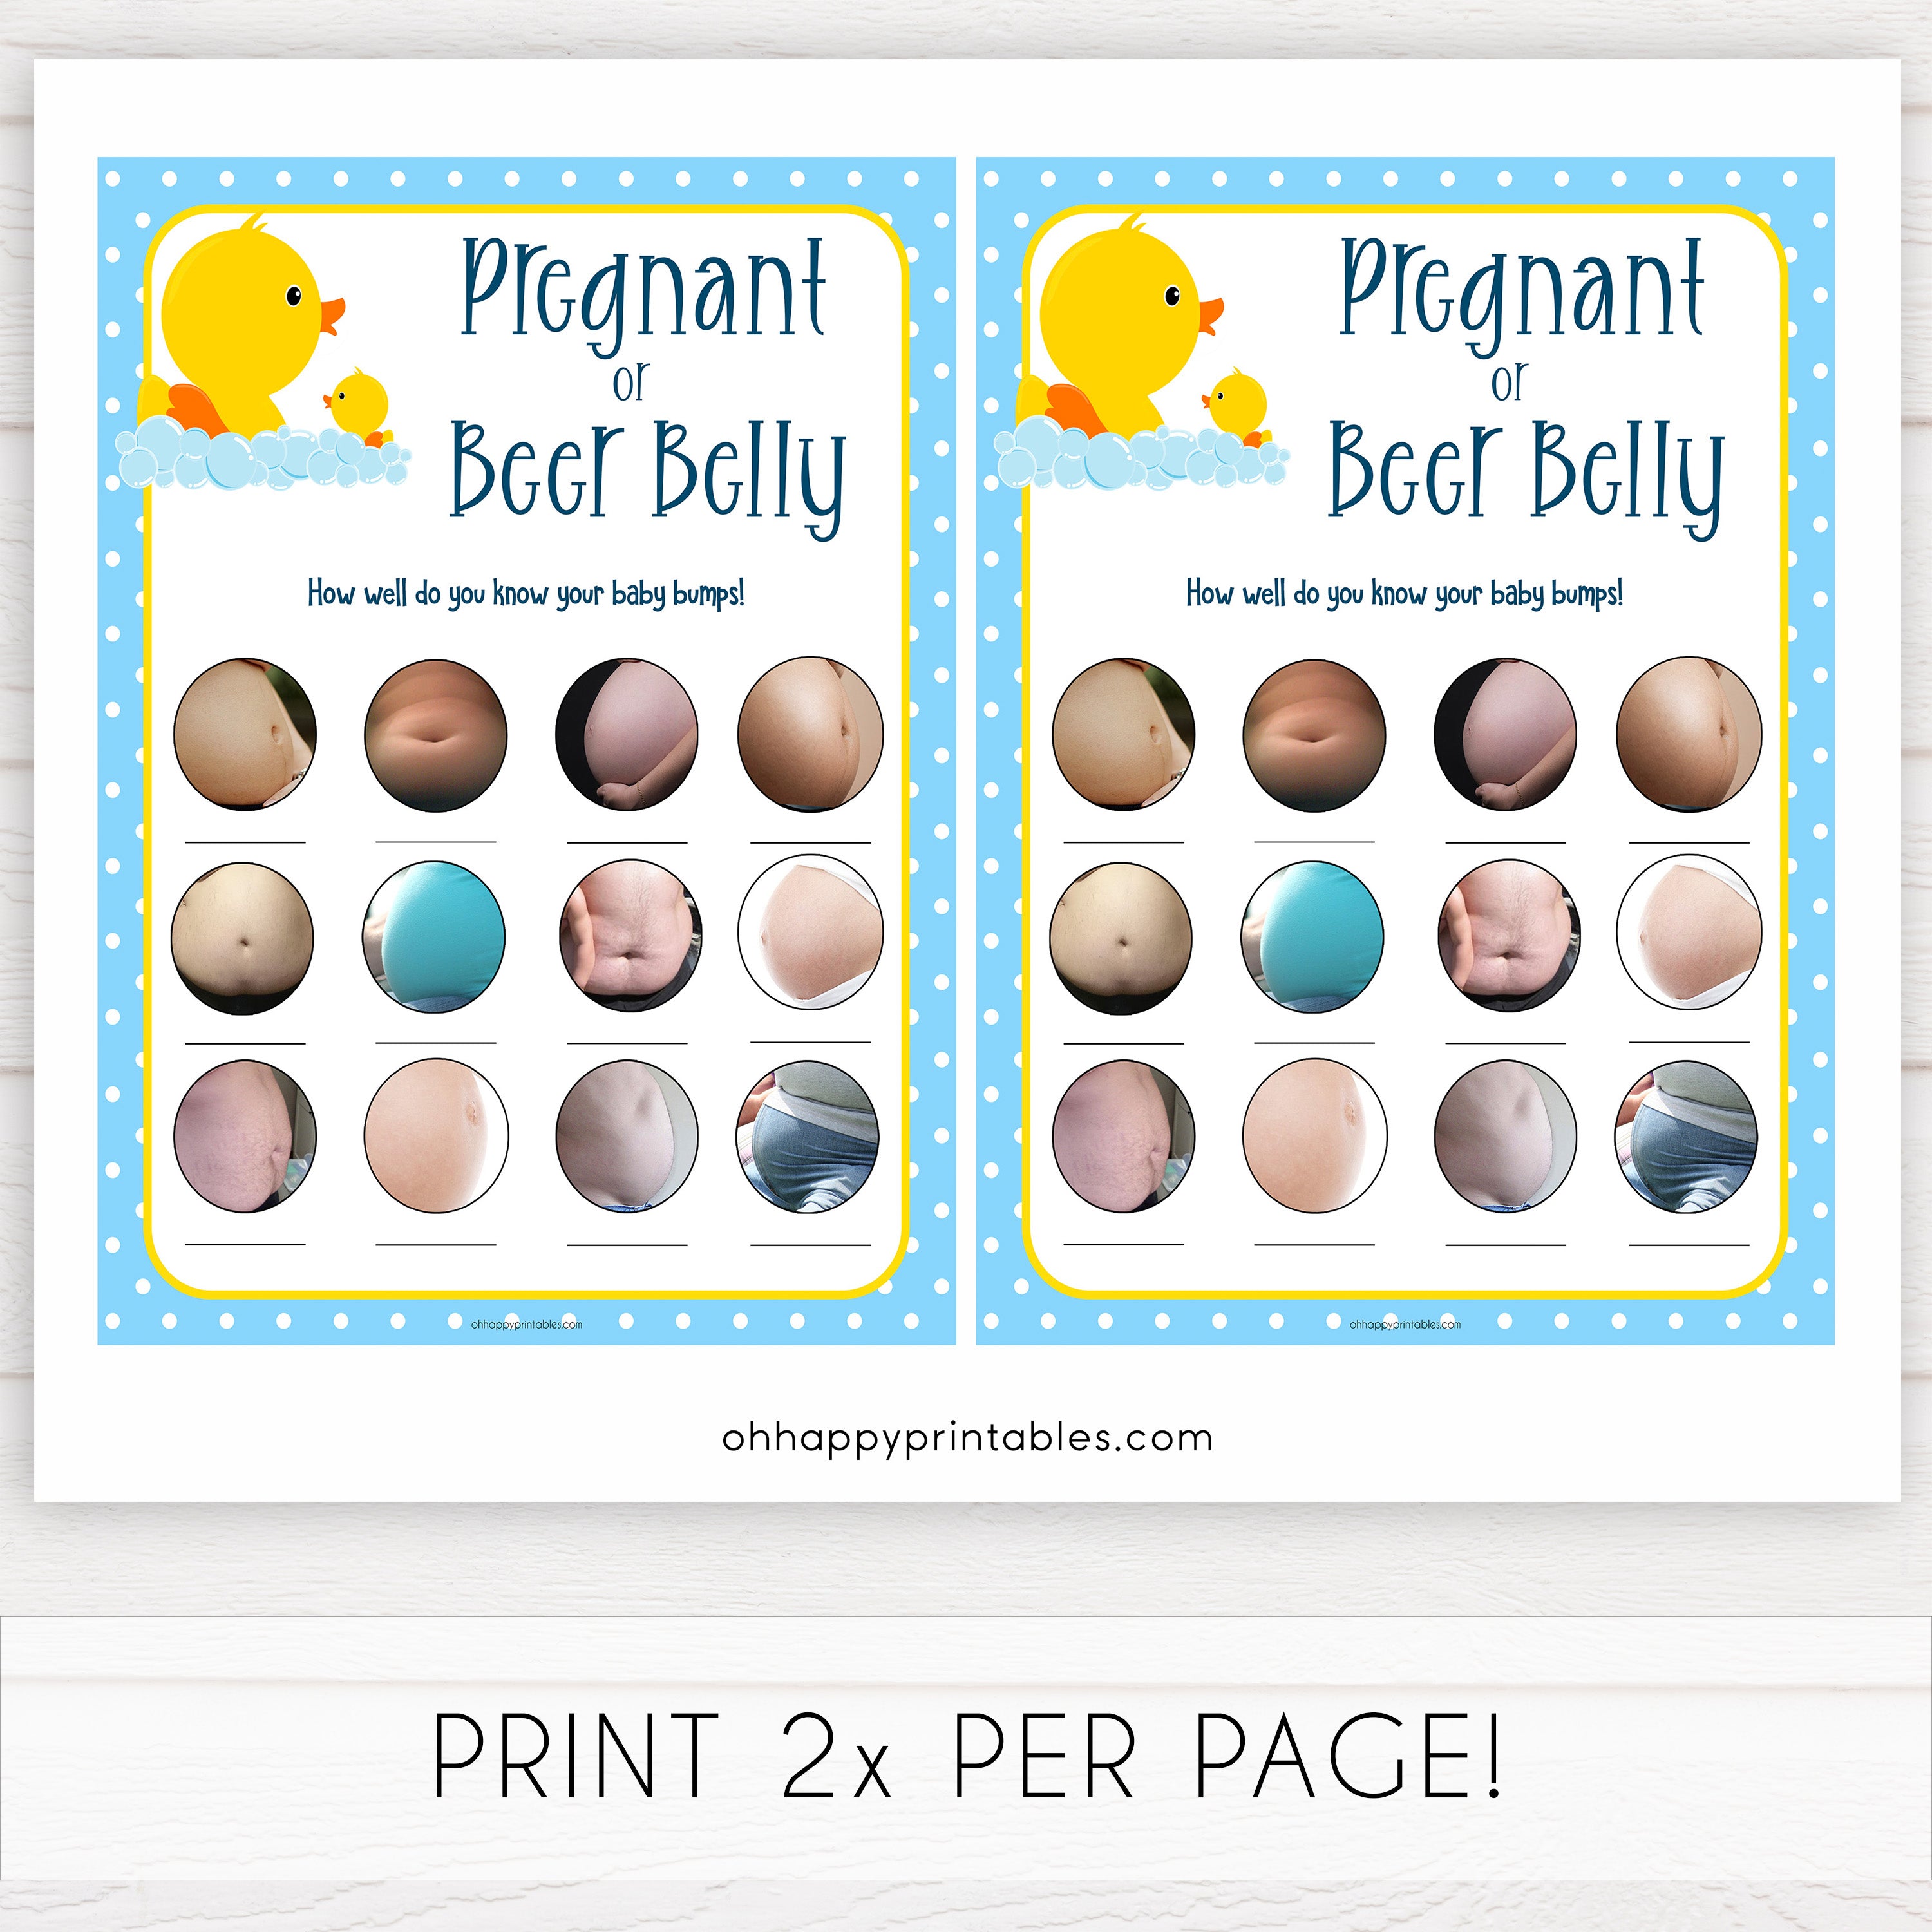 rubber ducky baby games, pregnant or beer belly baby game, printable baby games, baby shower games, rubber ducky baby theme, fun baby games, popular baby games